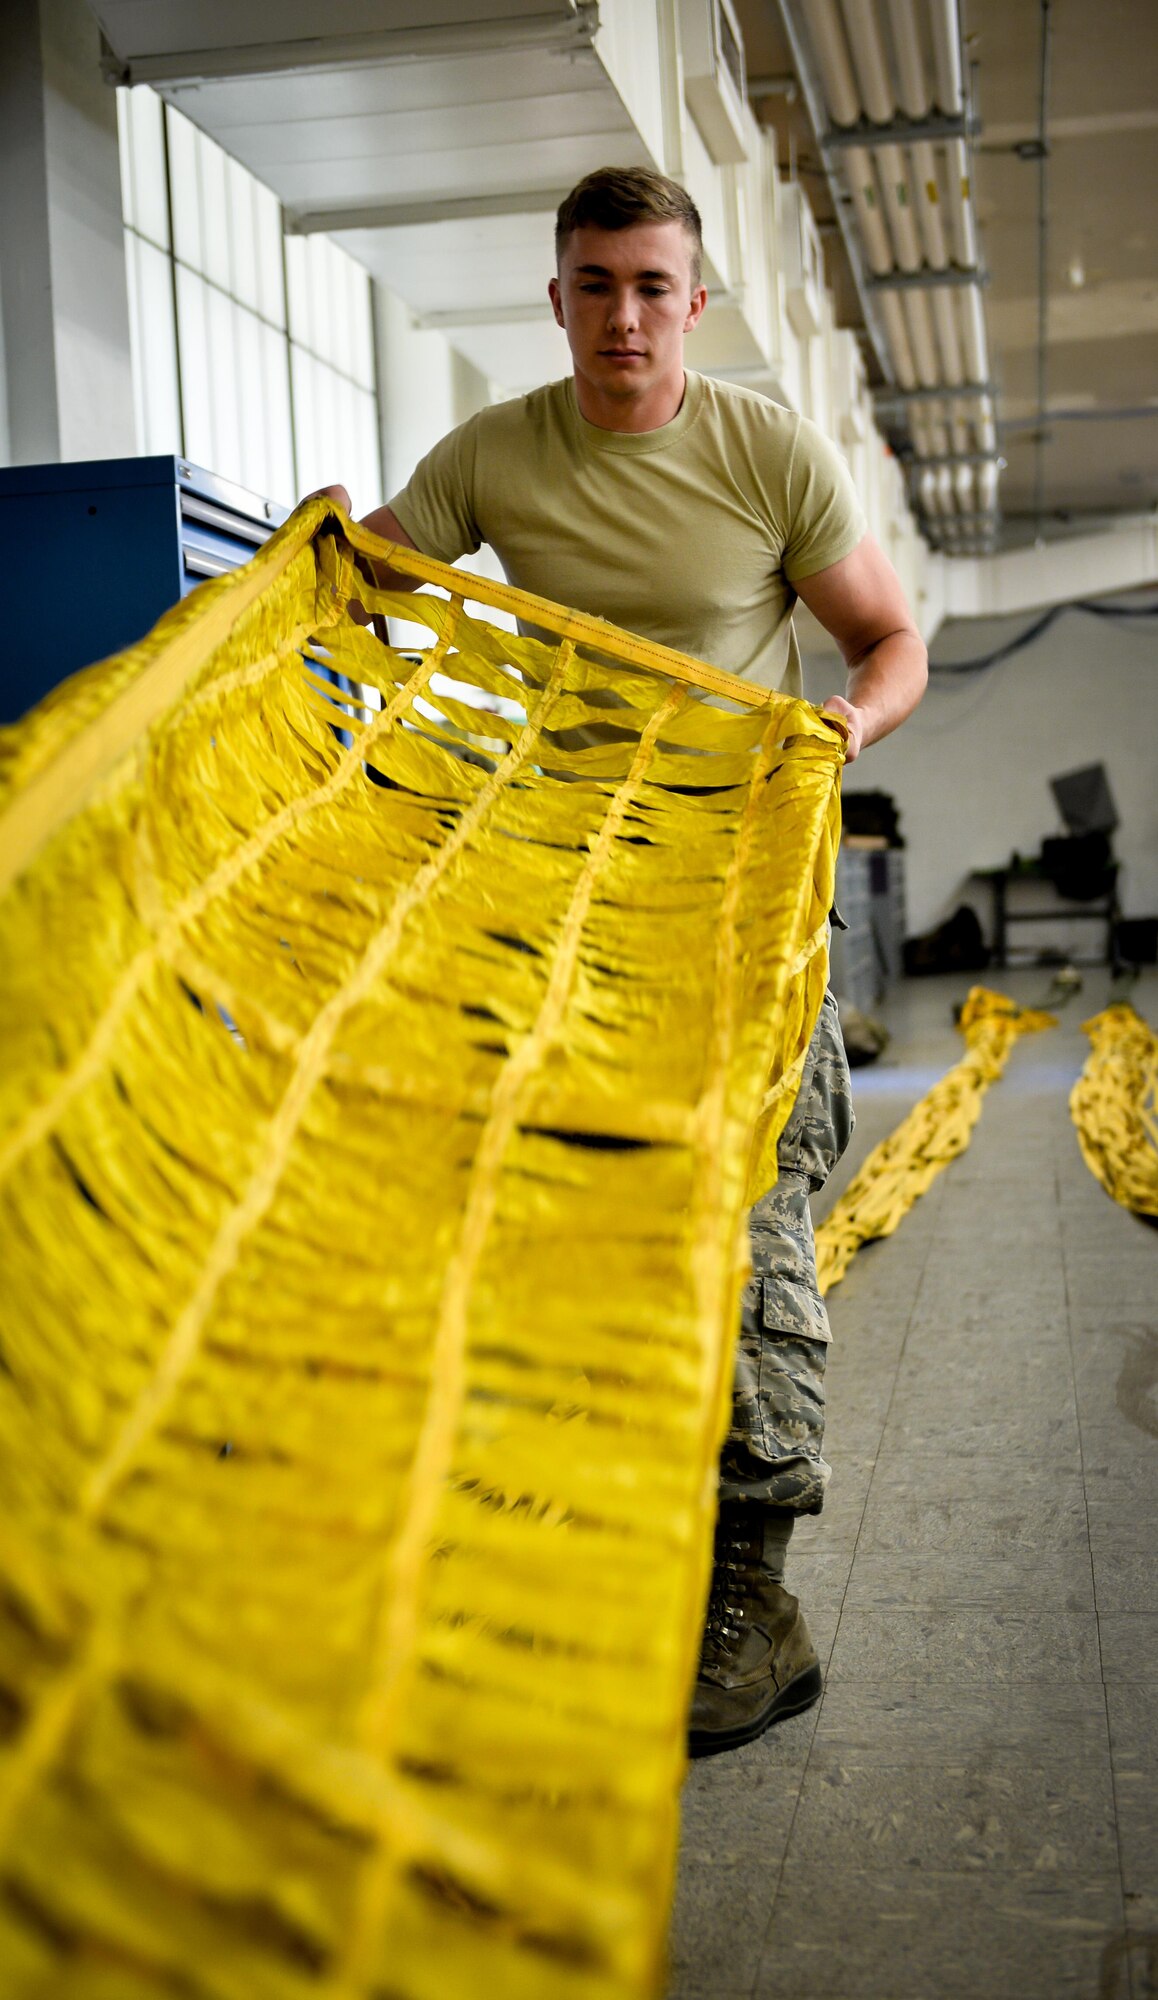 Airman 1st Class Eric Hornbeck, 2nd Operations Support Squadron aircrew flight equipment apprentice, inspects a drag chute at Barksdale Air Force Base, La., June 7, 2016. Hornbeck inspected the canopy and looked for damage that could potentially cause the parachute to malfunction. (U.S. Air Force photo/Senior Airman Mozer O. Da Cunha)